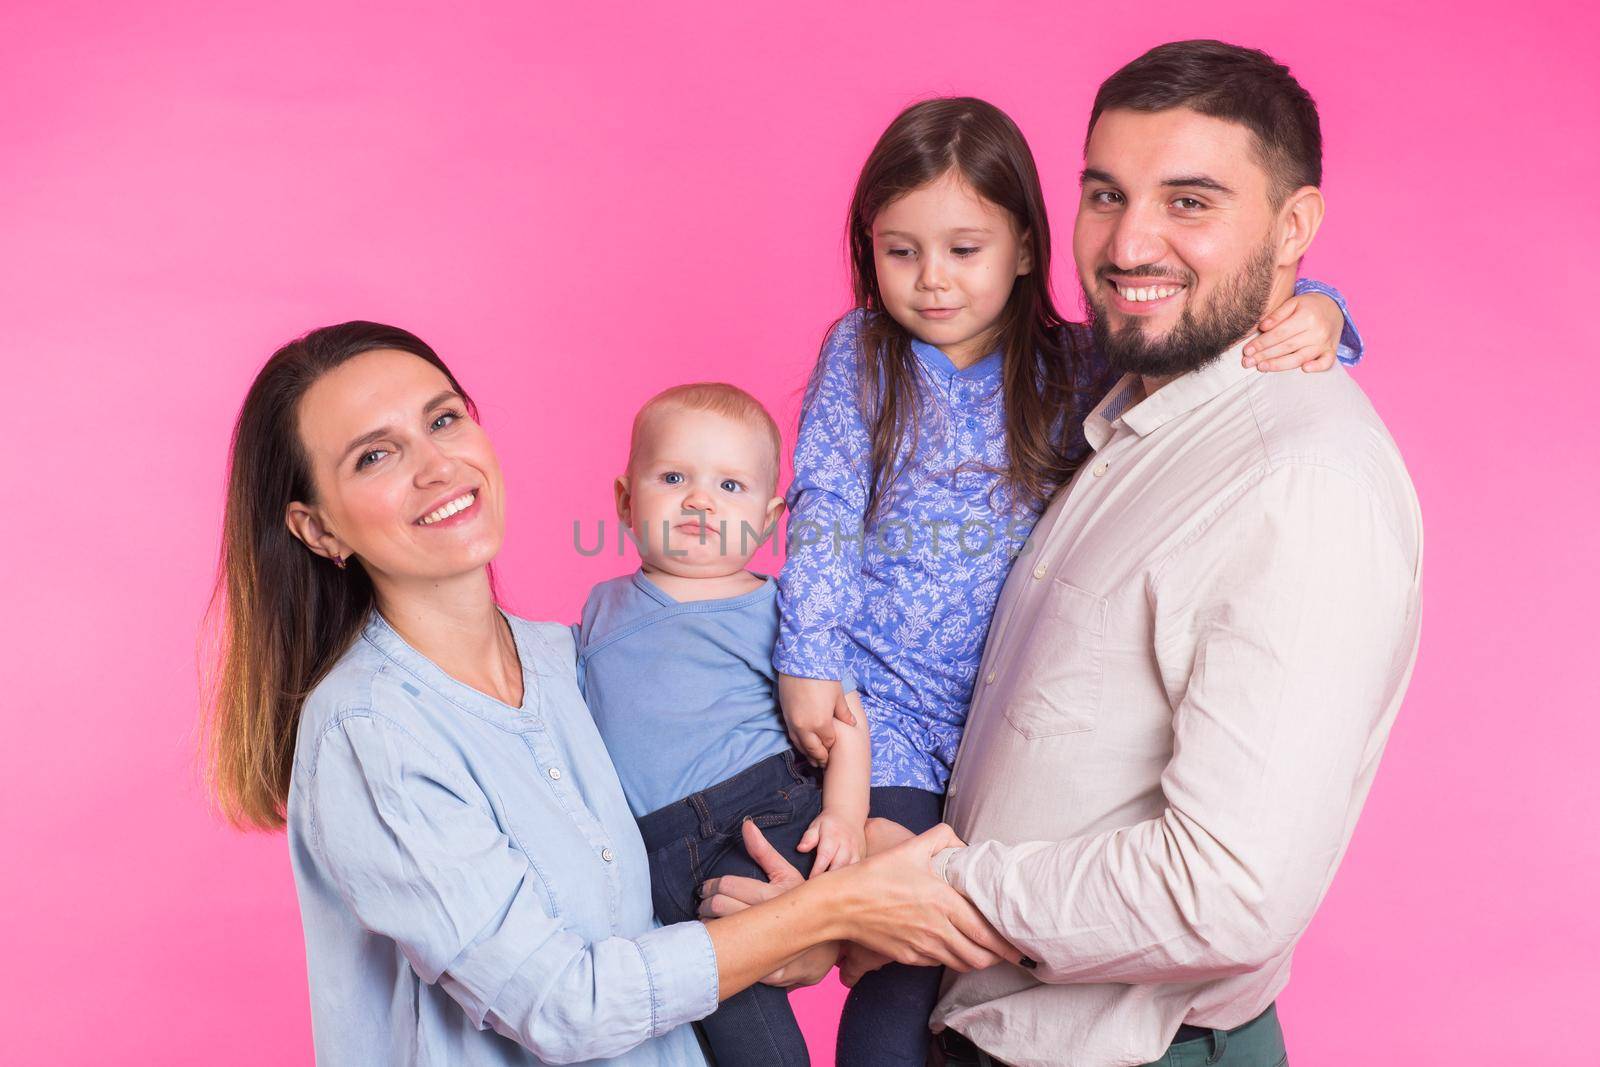 Happy mixed race family portrait smiling on pink background by Satura86